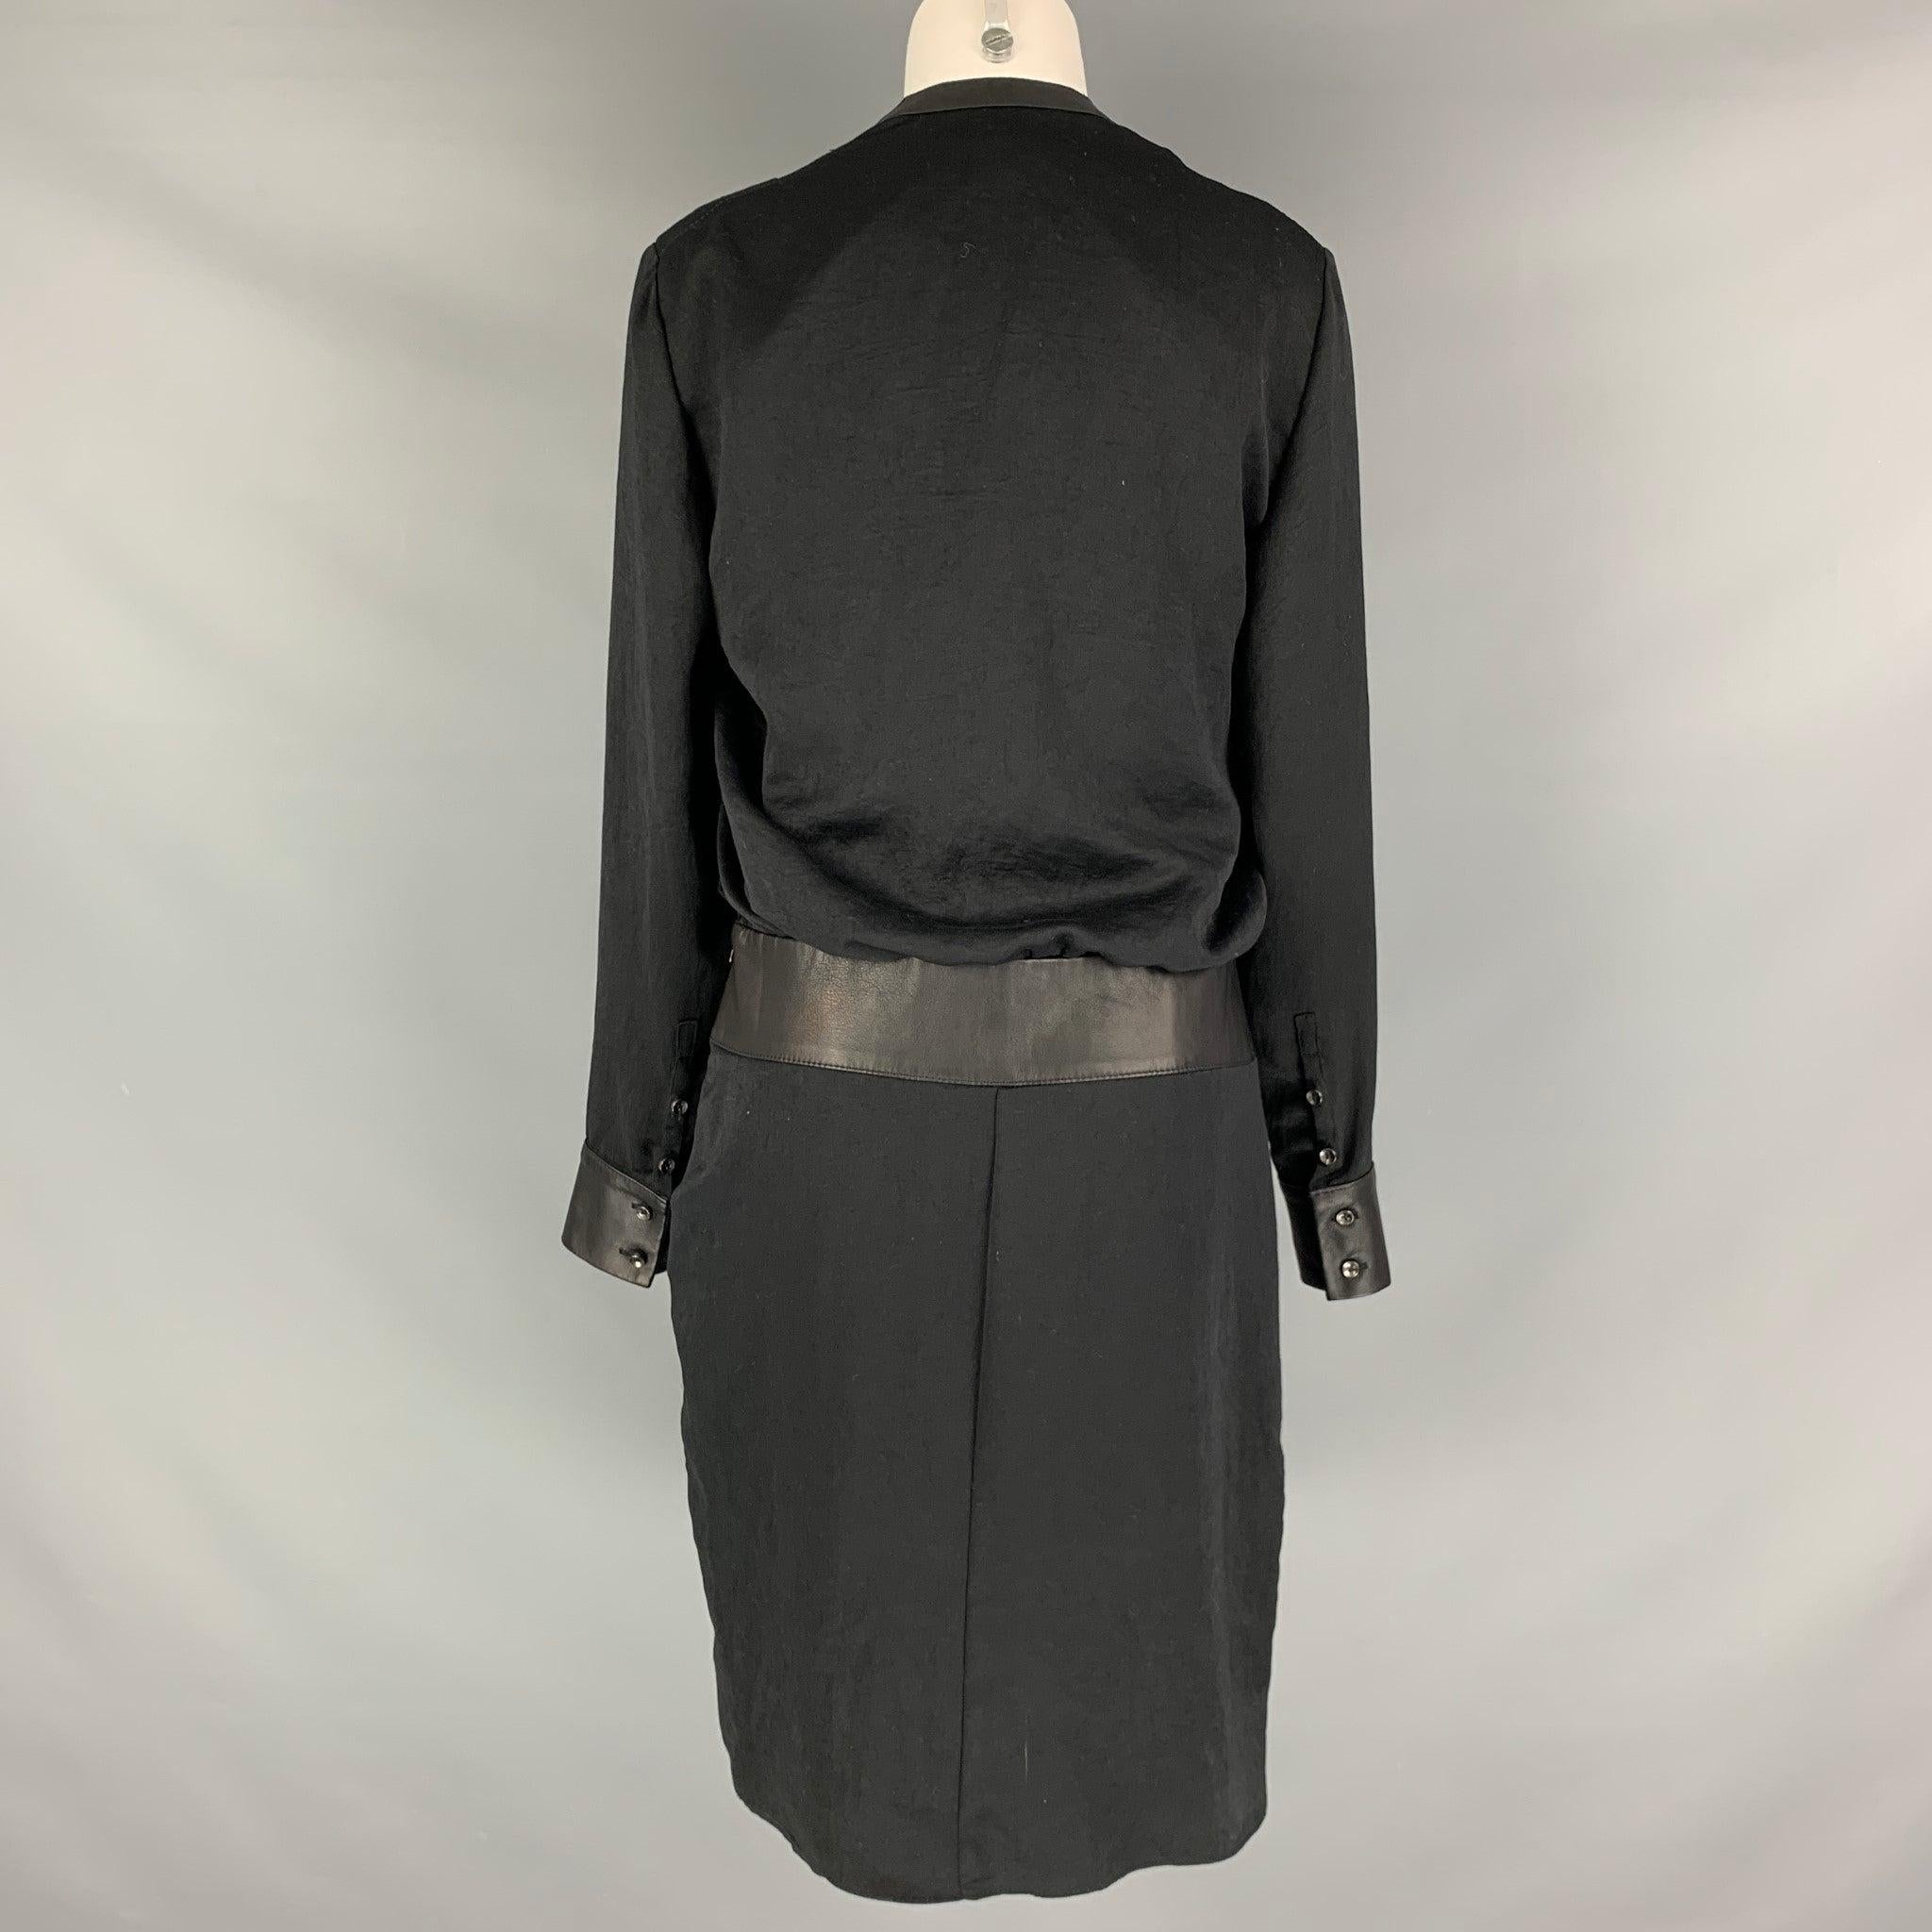 HELMUT LANG Size 6 Black Polyester Lamb Skin Long Sleeve Dress In Excellent Condition For Sale In San Francisco, CA